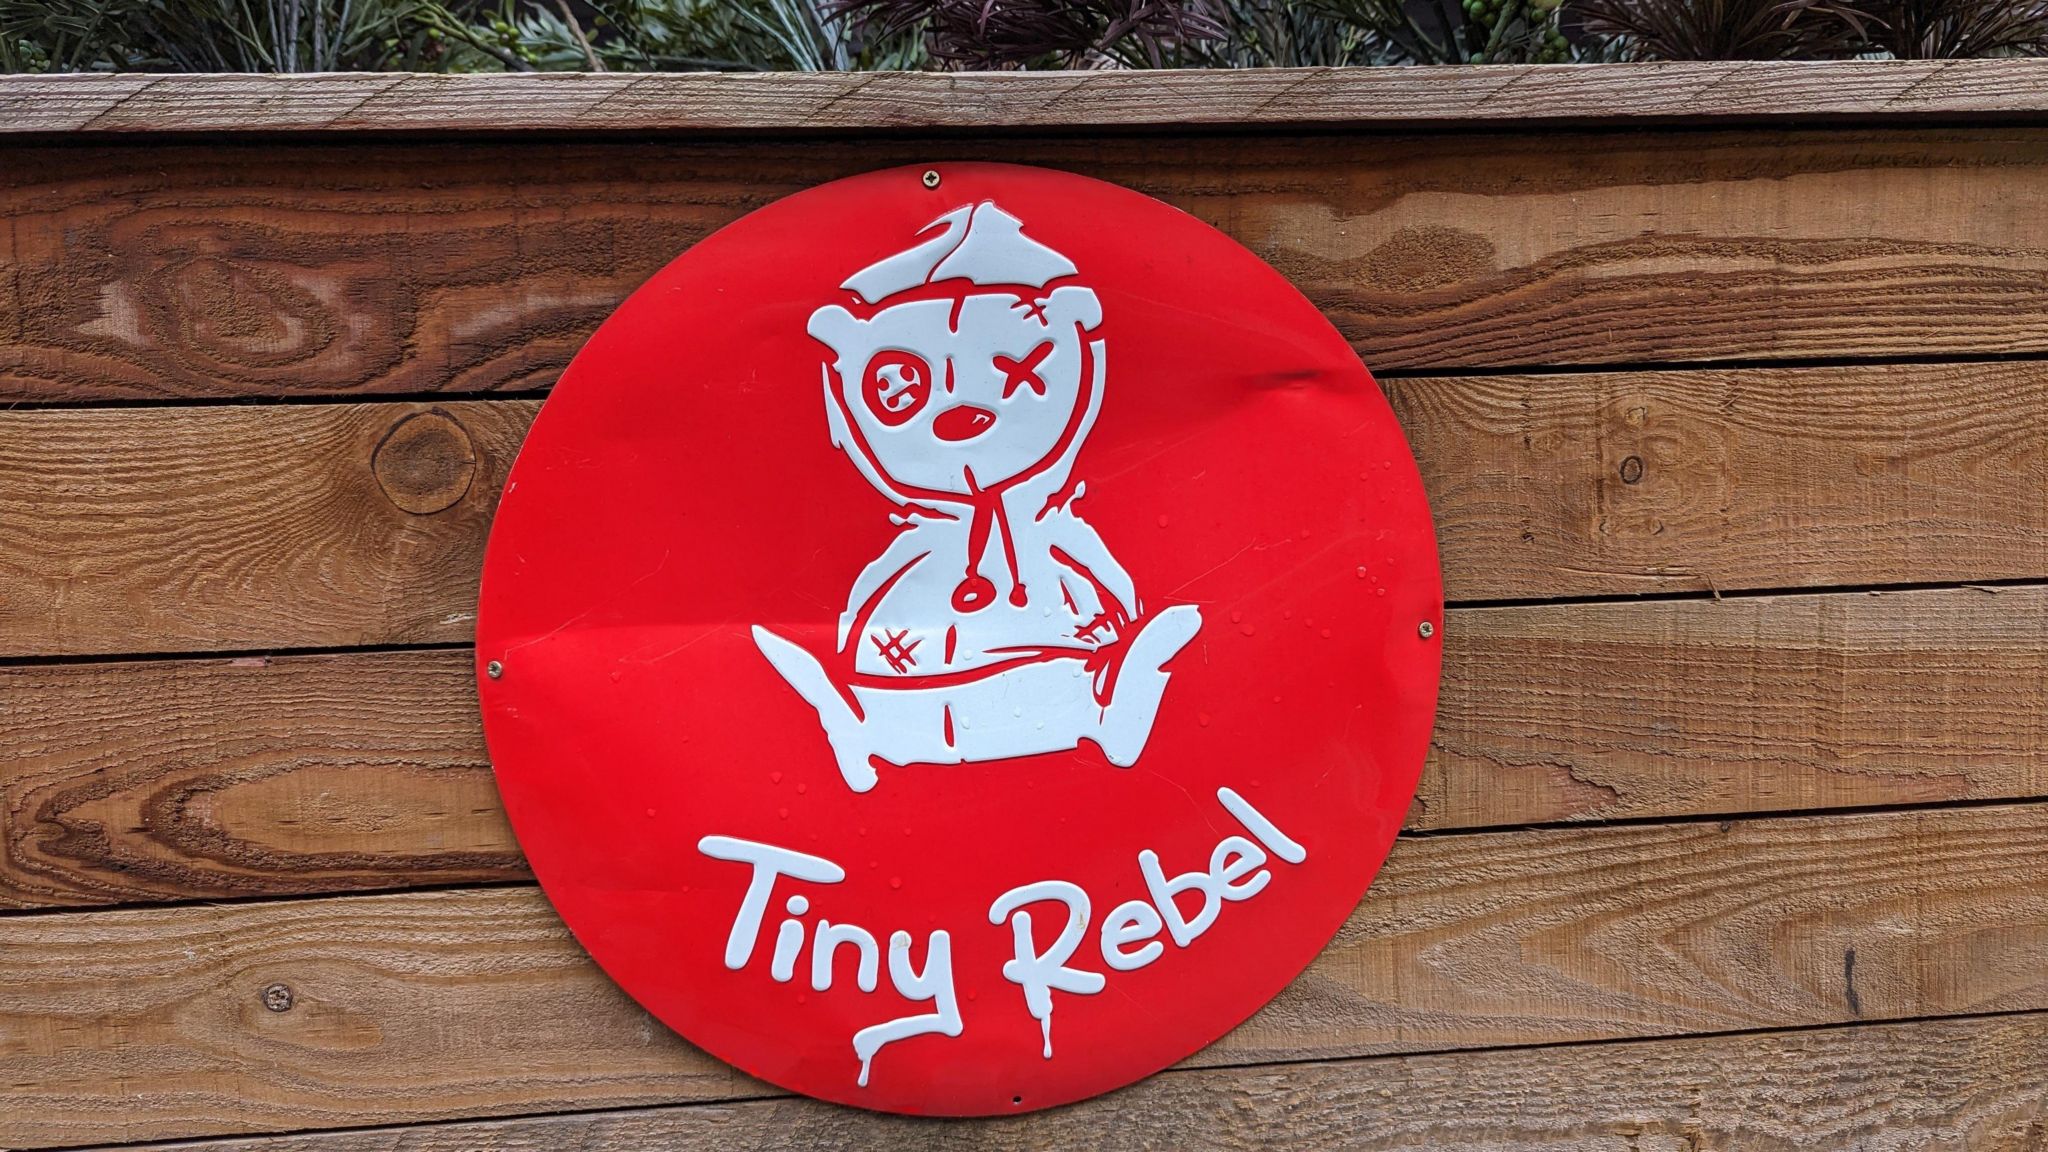 The Tiny Rebel logo outside its bar in Newport